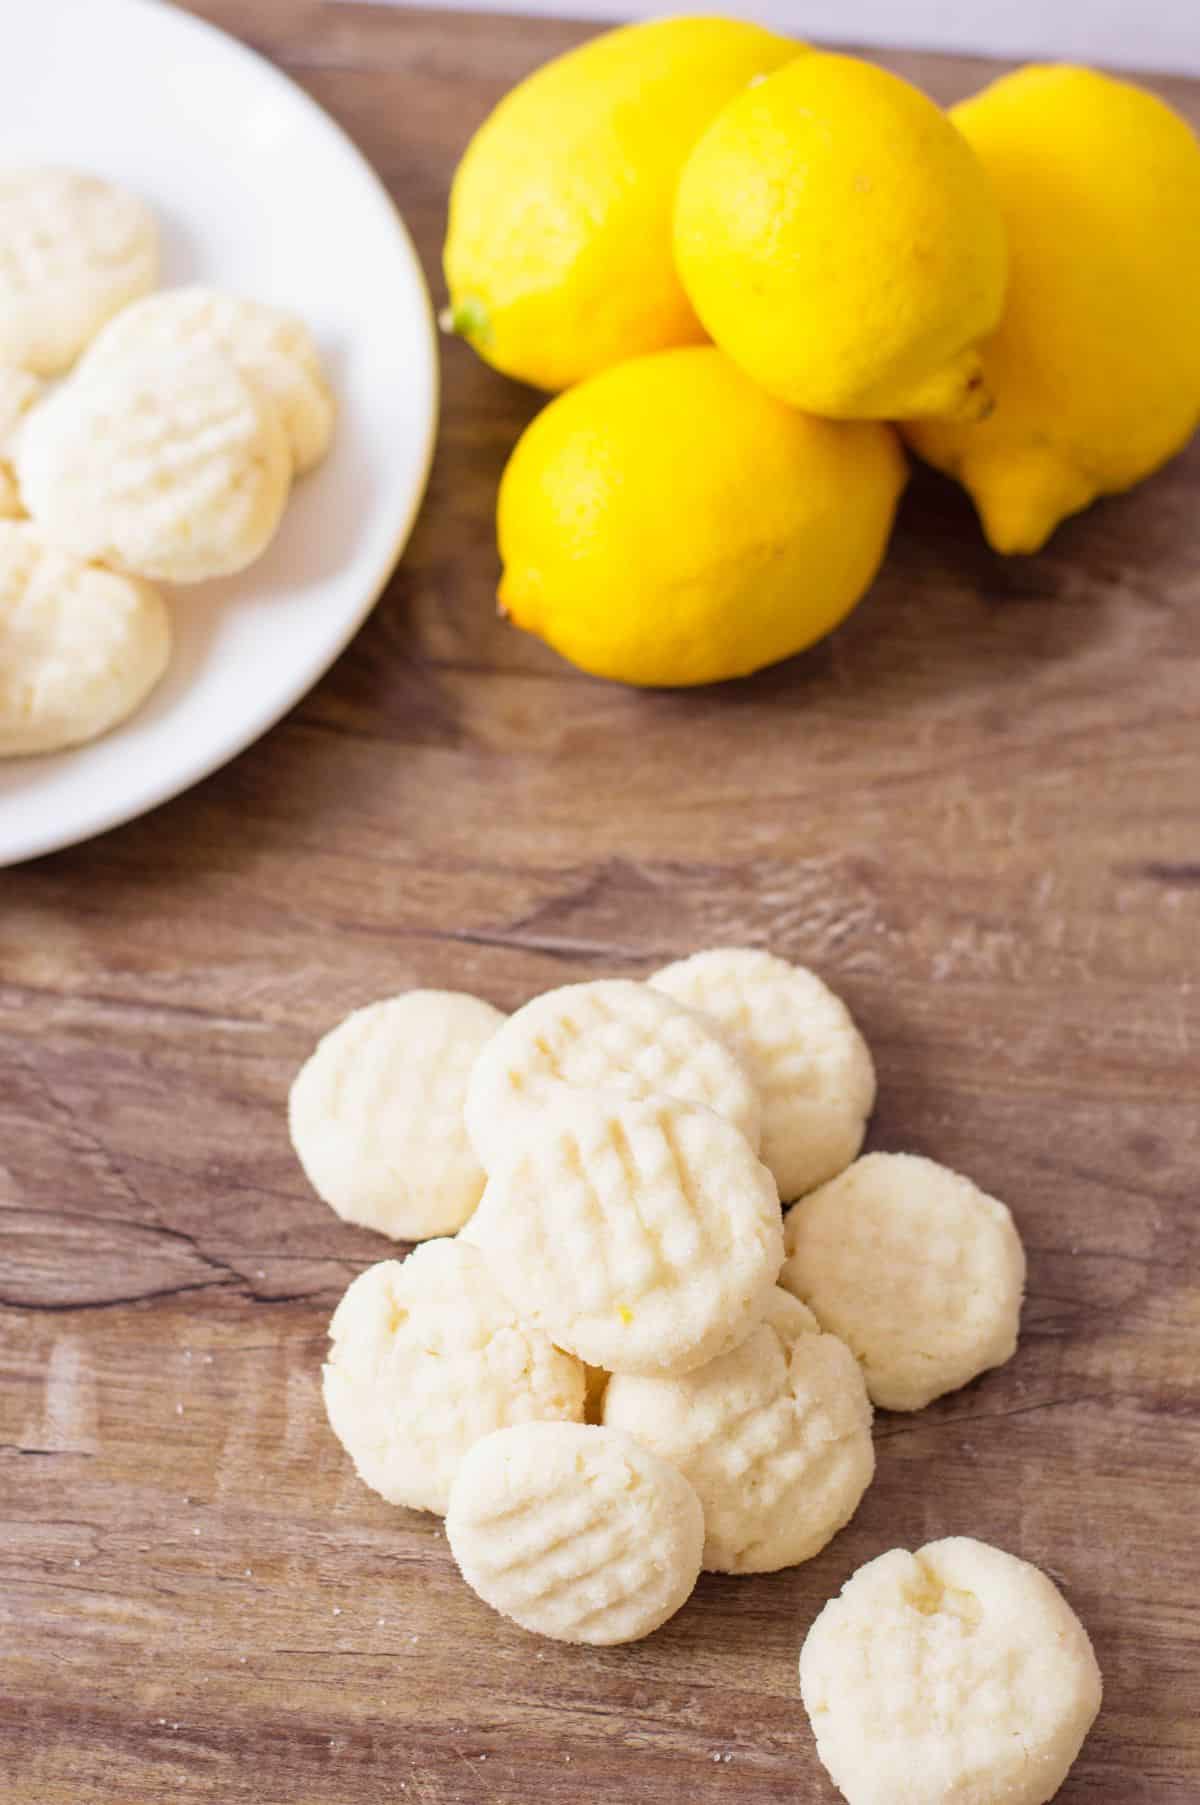 Lemon Shortbread Cookies on a wooden table. Lemon and a plate with cookies on the side.